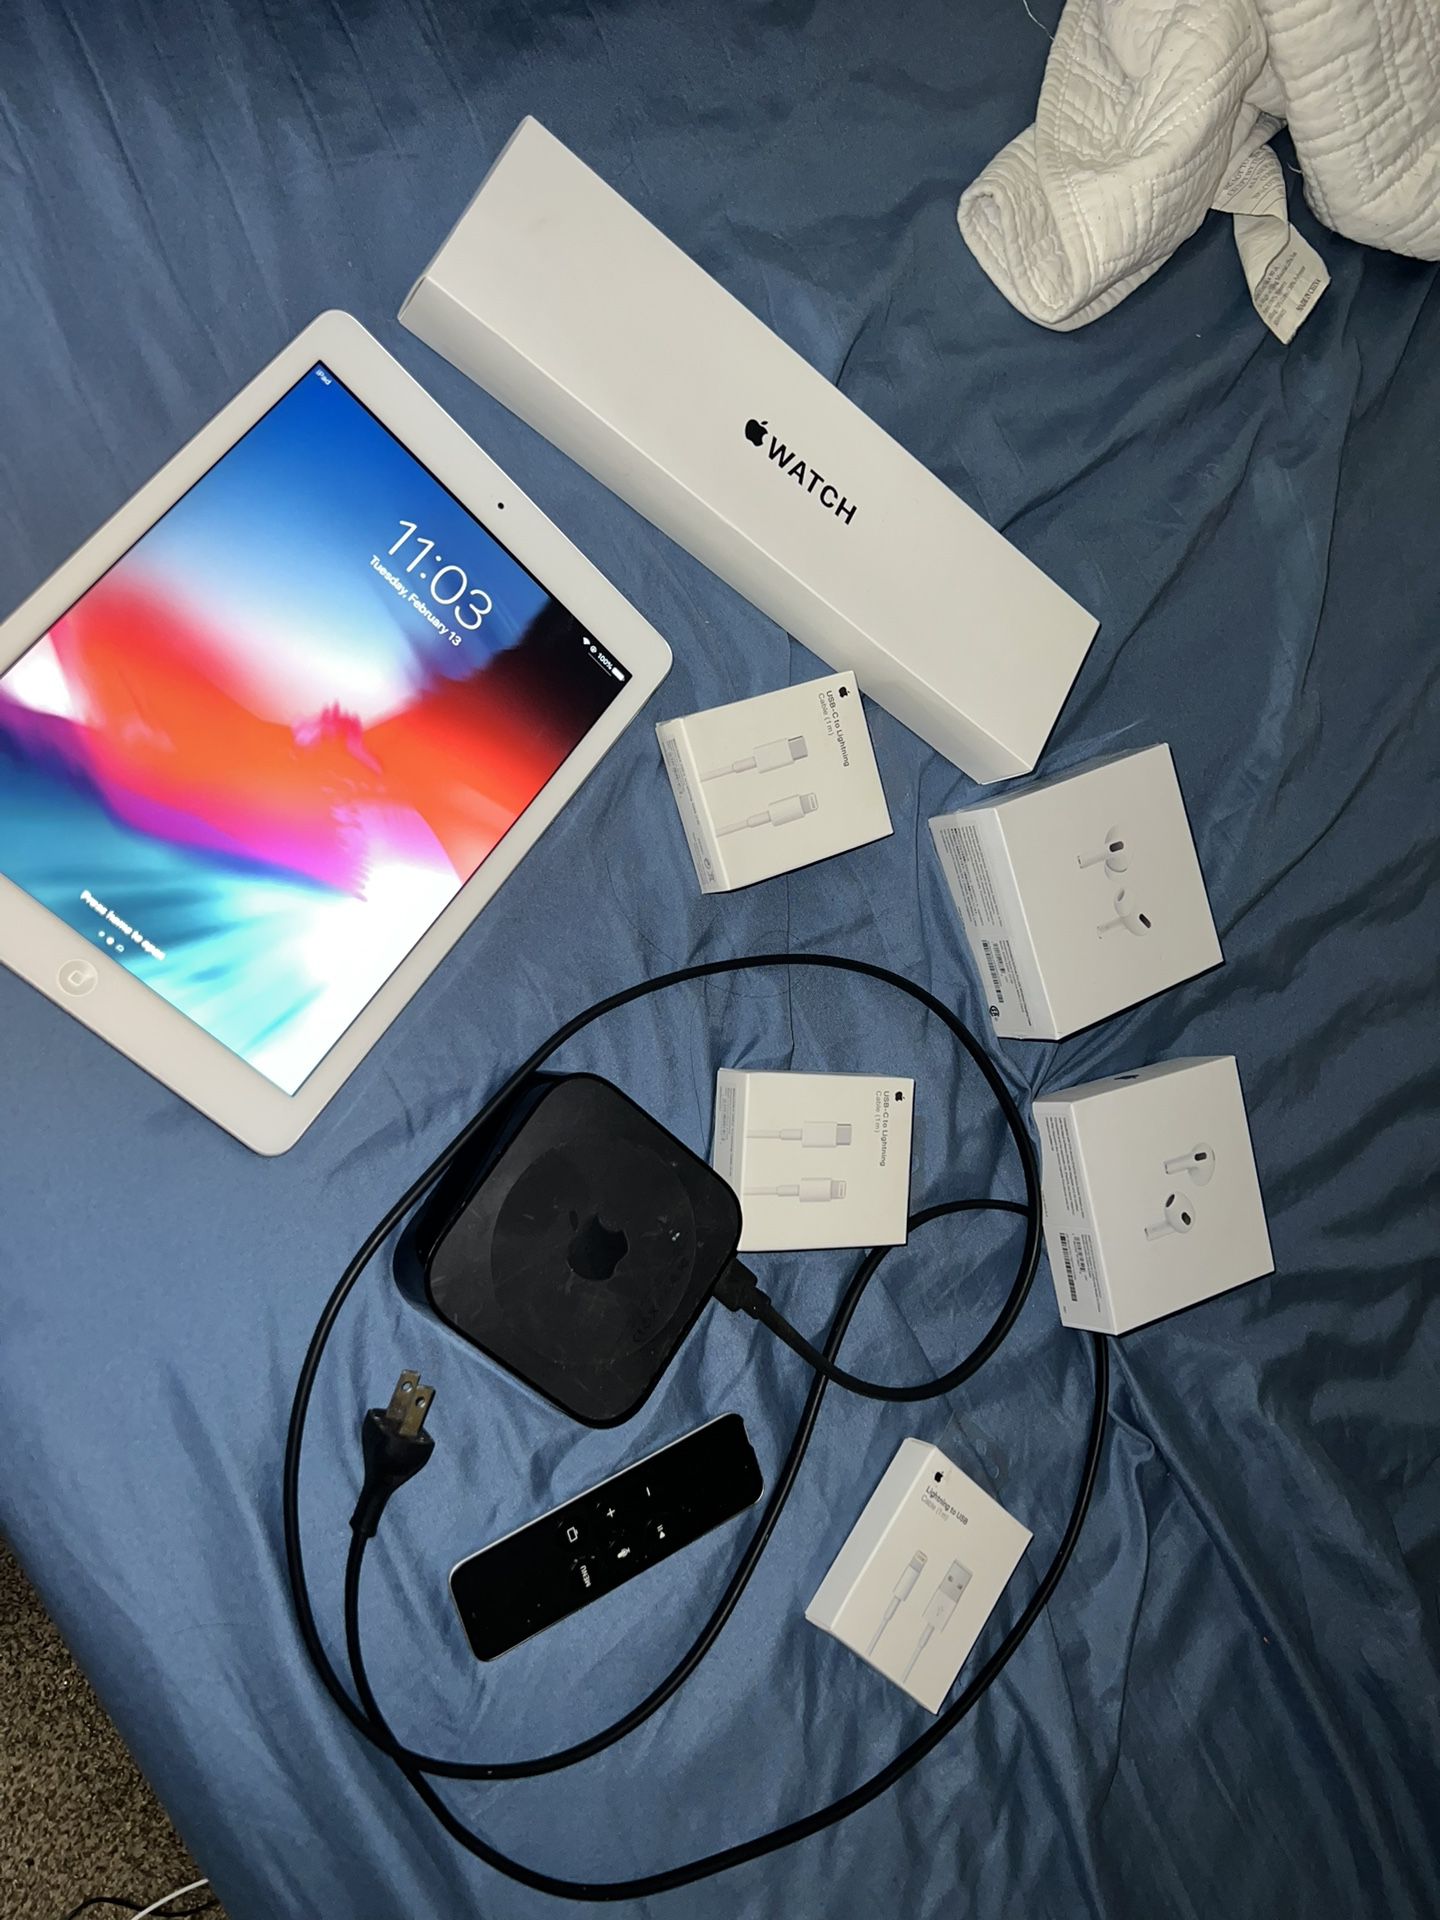 Apple Bundle Watch/ iPad/ Pods/ Chargers 💰